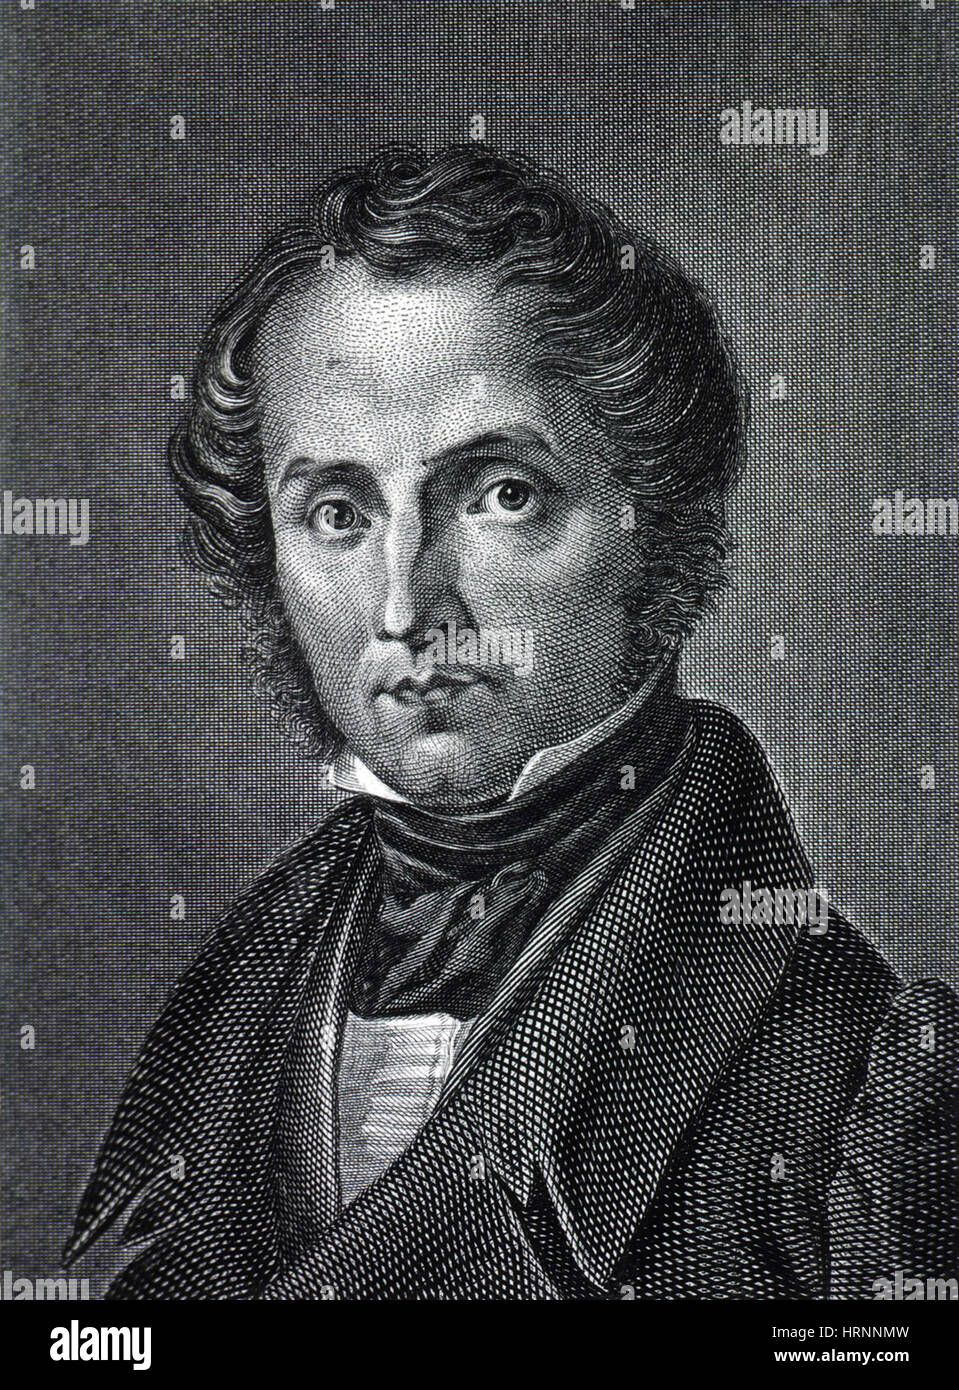 Justus Von Liebig High Resolution Stock Photography and Images - Alamy